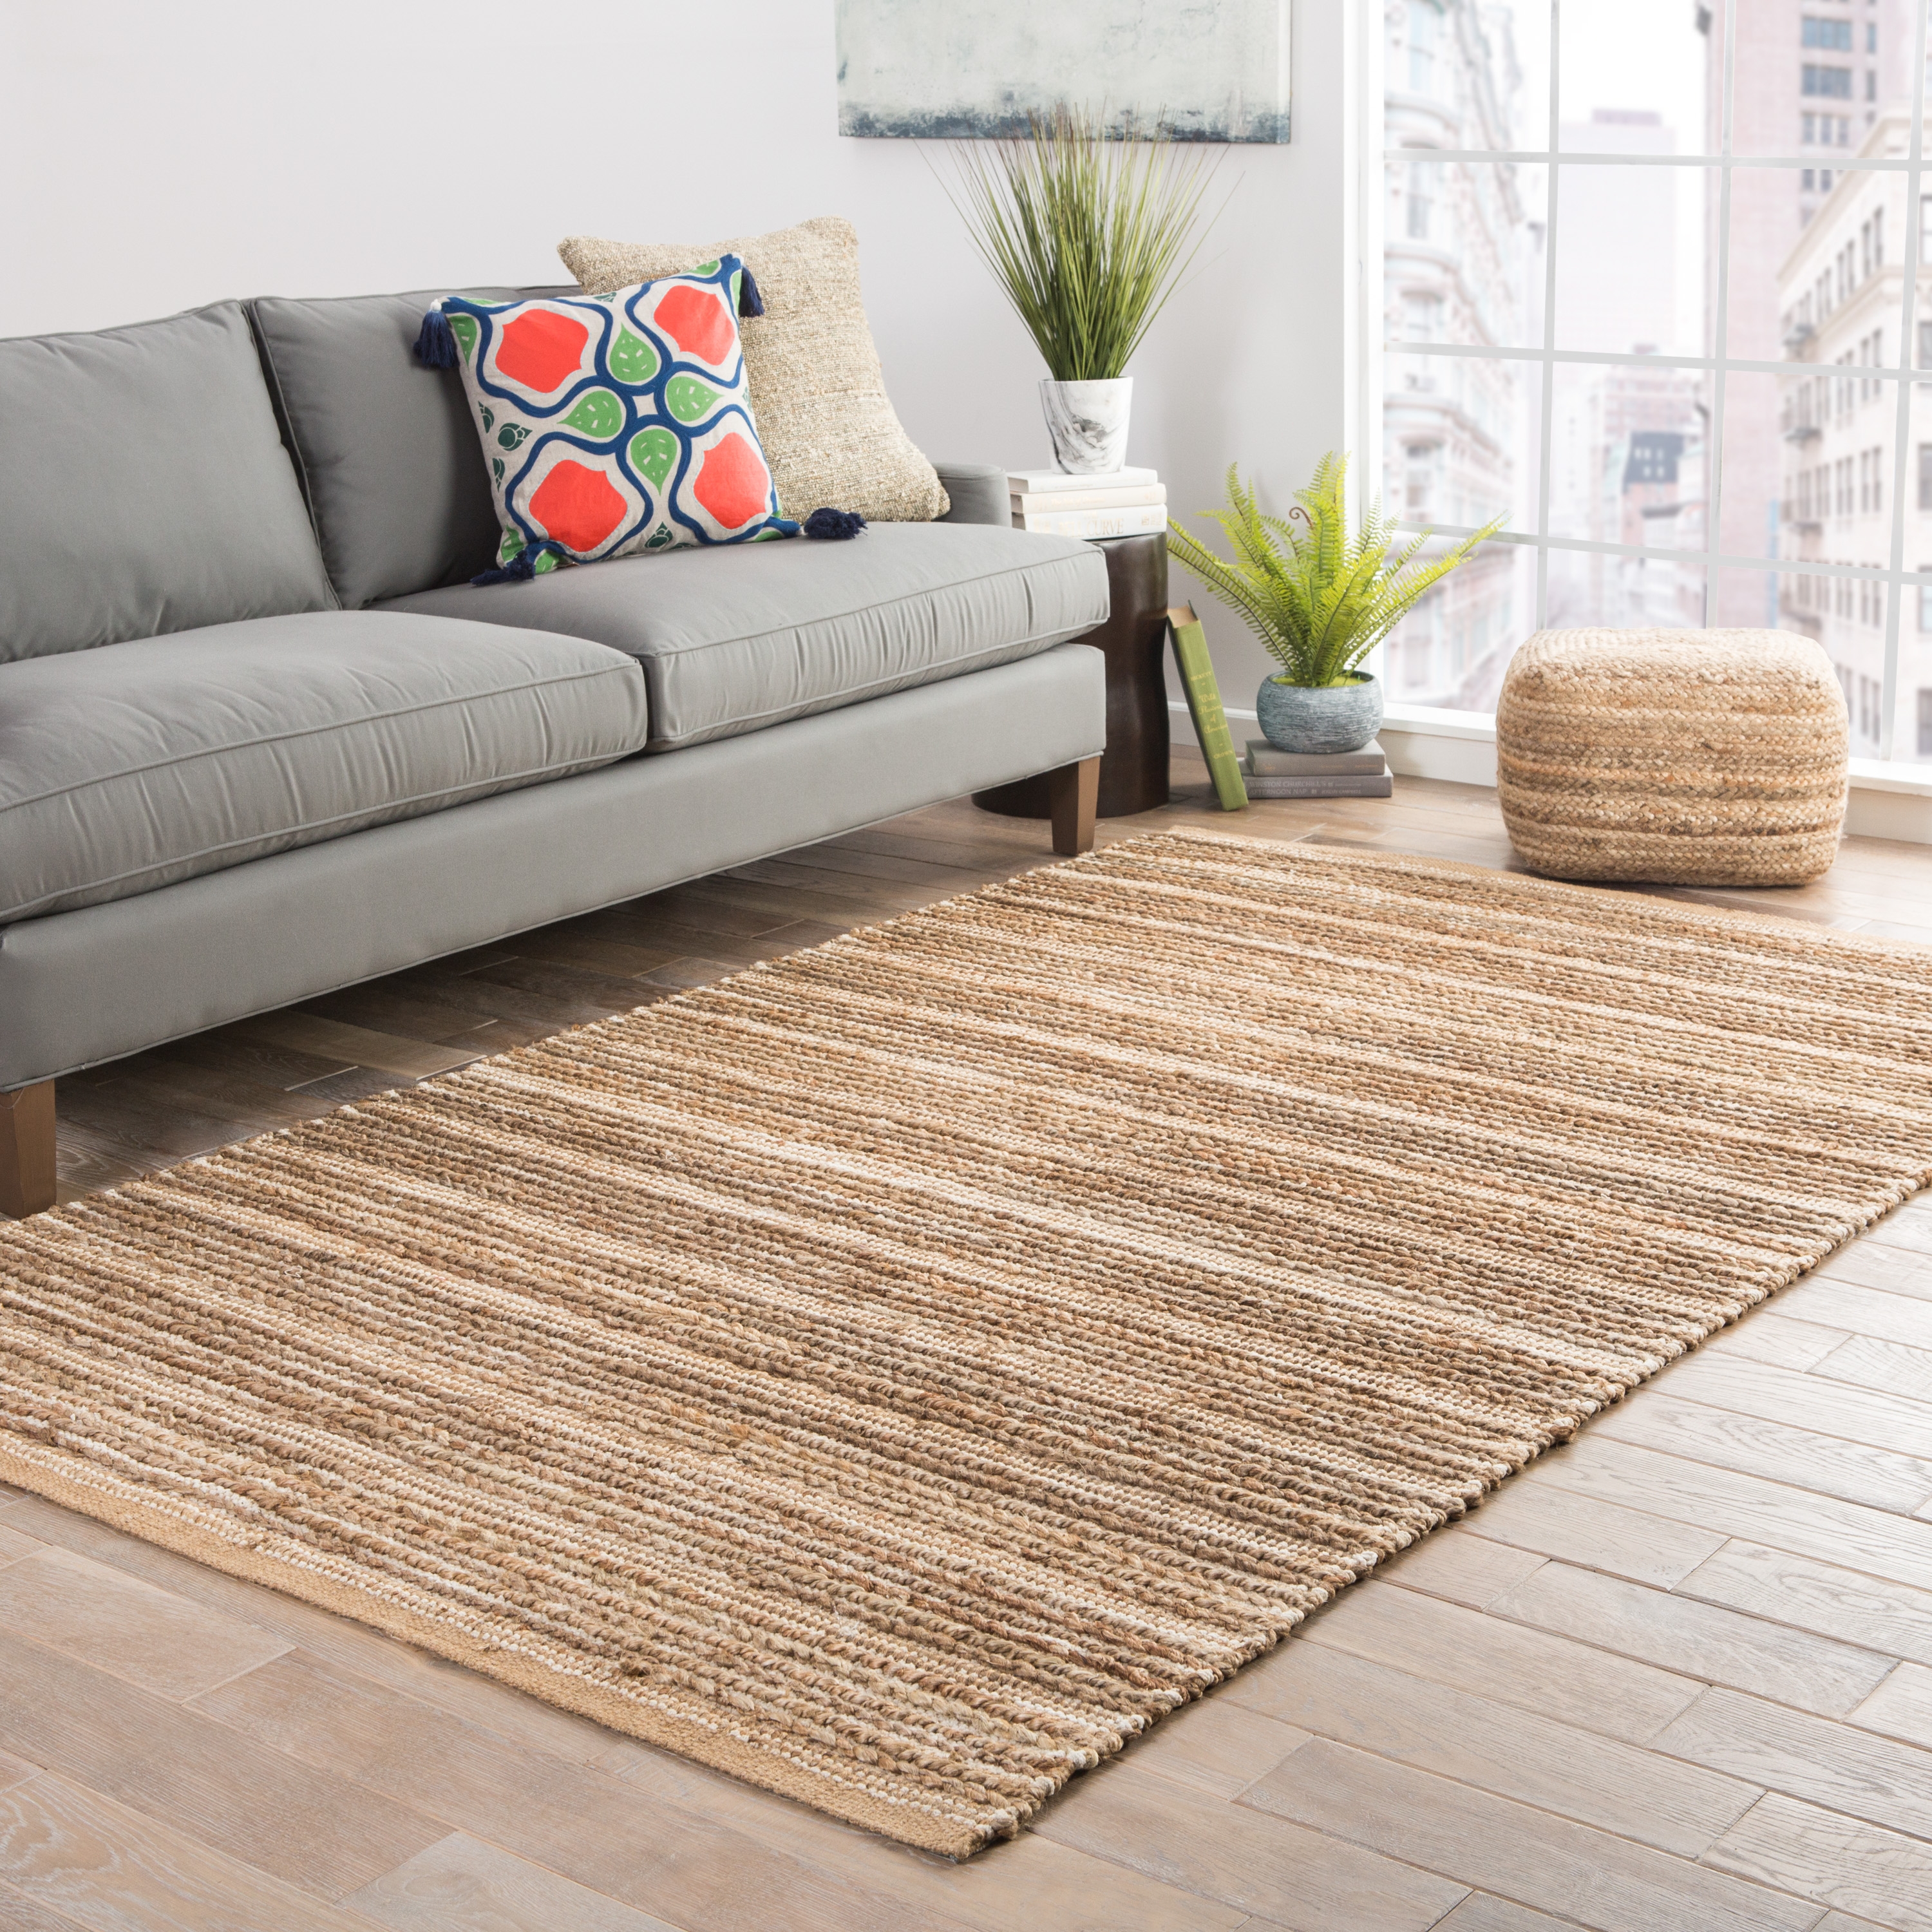 Clifton Natural Solid Tan/ White Area Rug (8' X 10') - Image 4